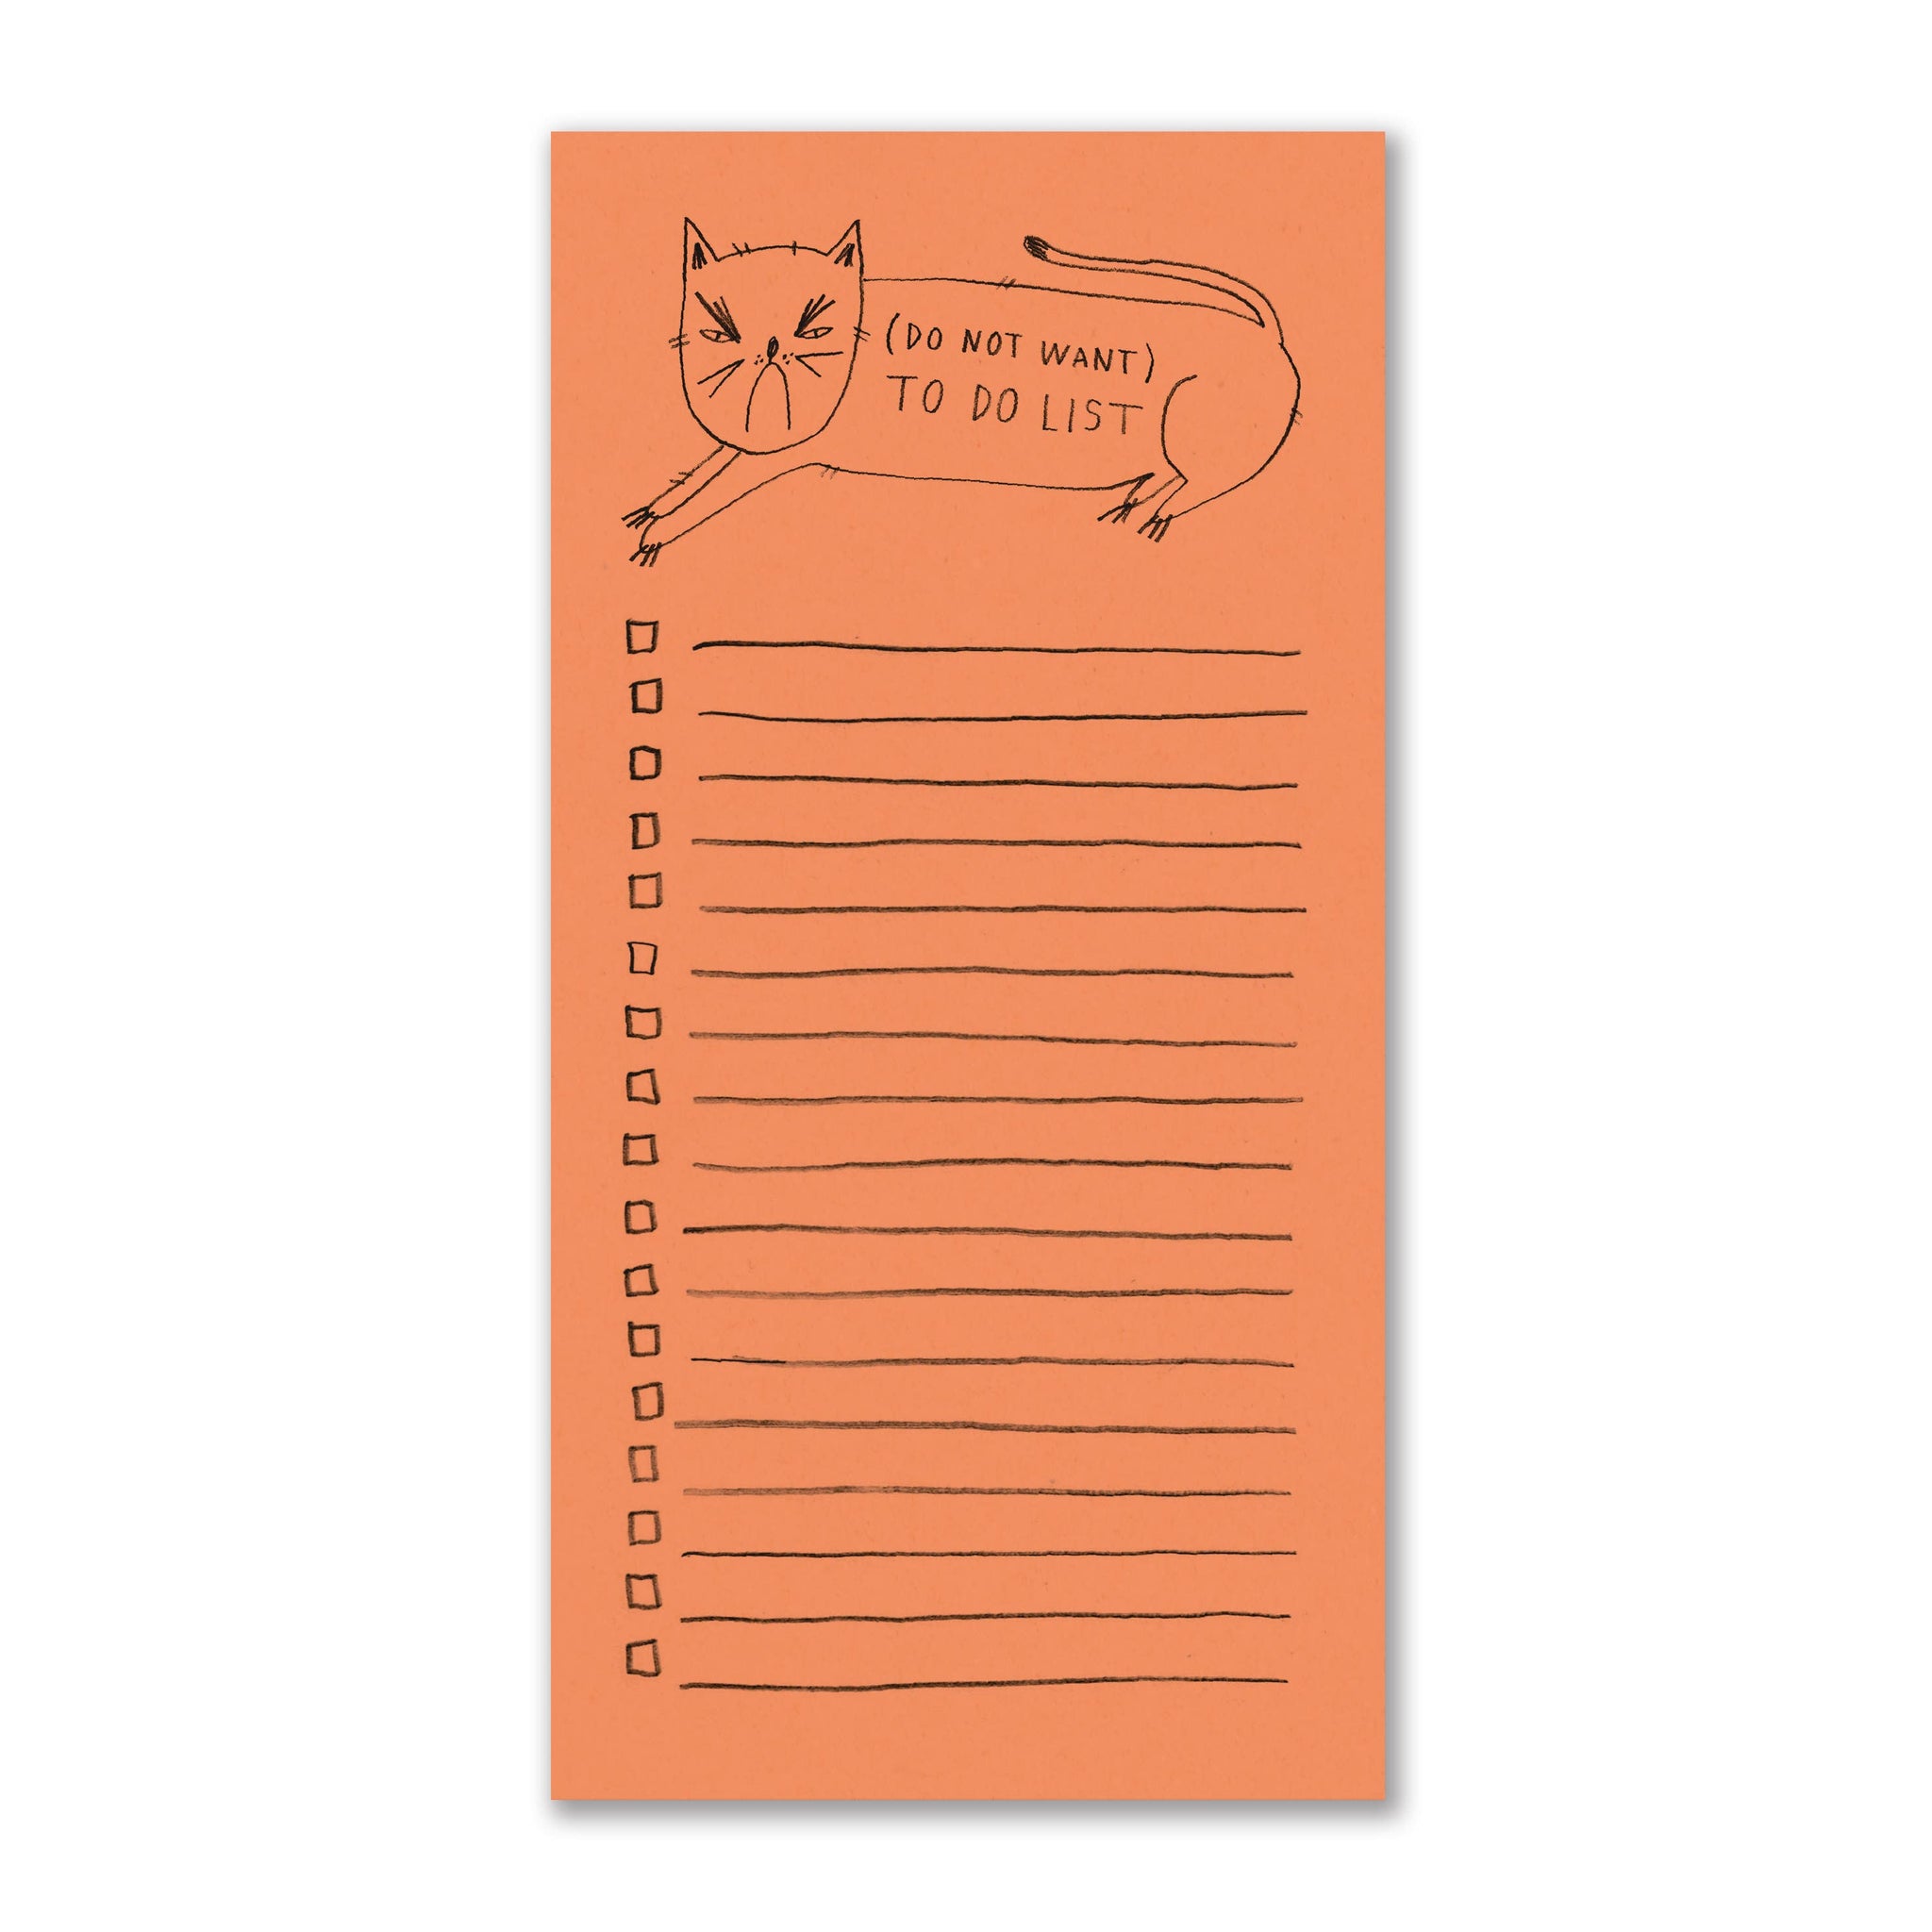 "(Do Not Want) To Do List" Notepad